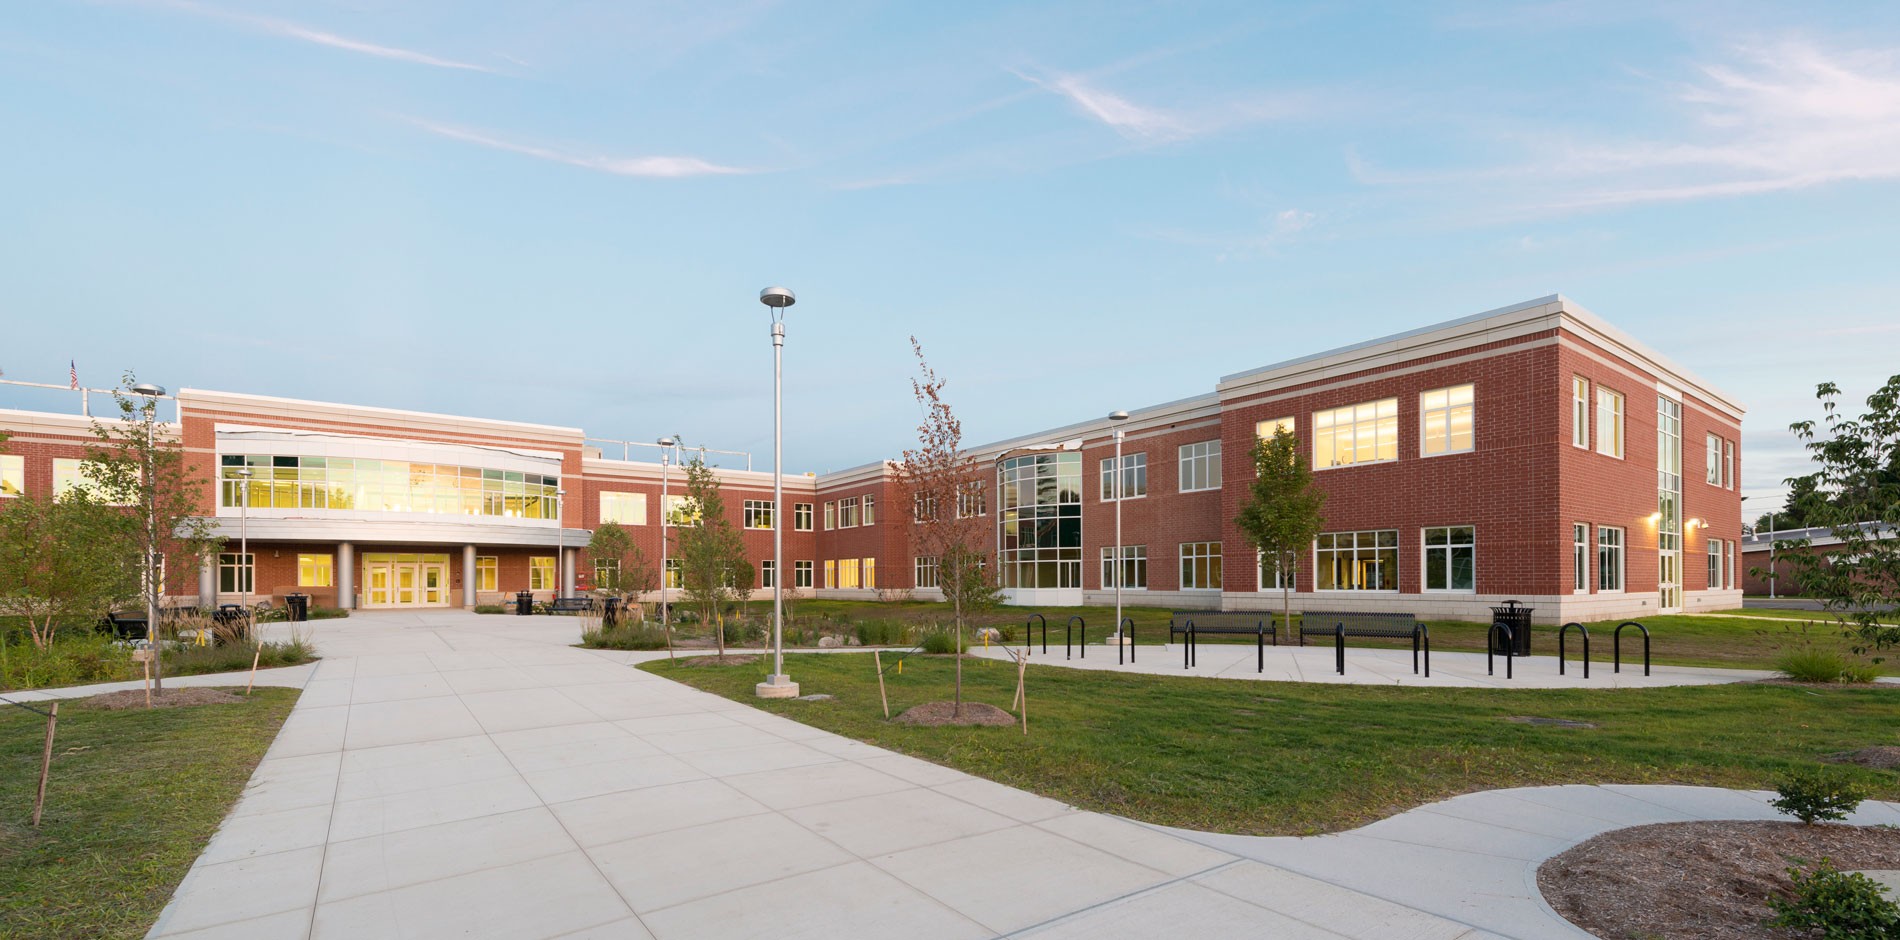 greenfield-ma-high-school-ground-up-addition-renovation-project